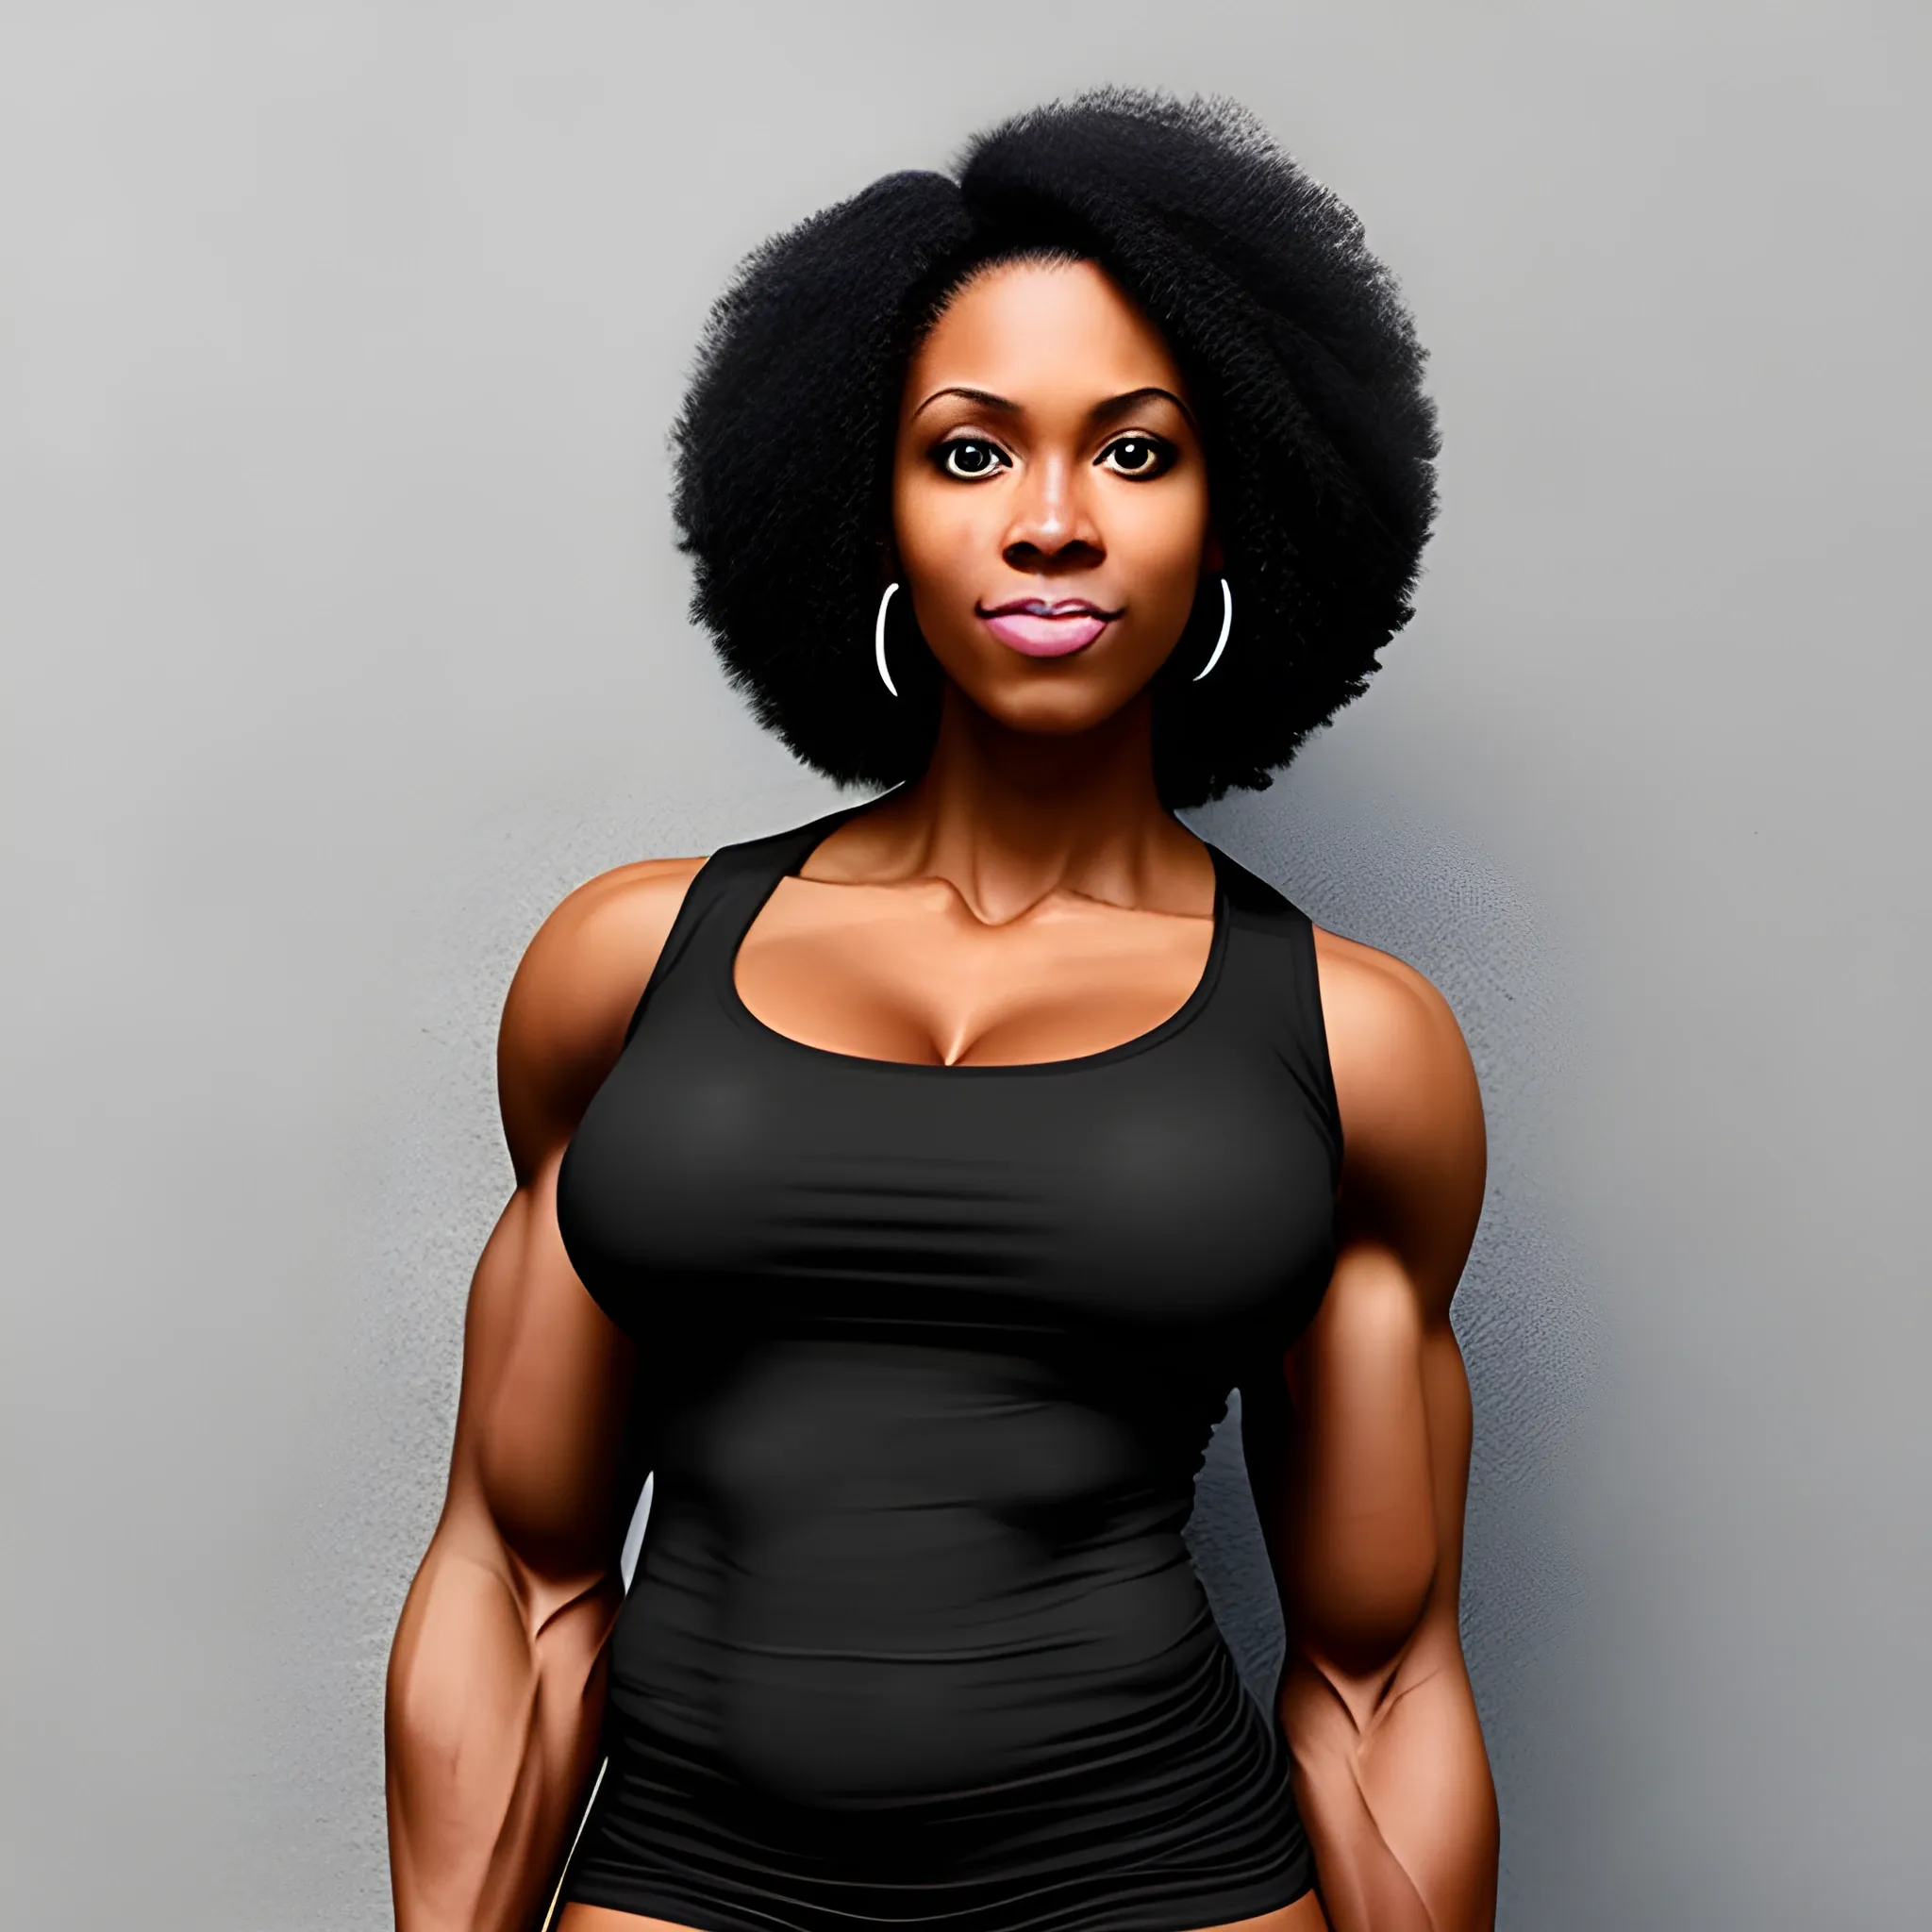 tall black woman with muscles - Arthub.ai